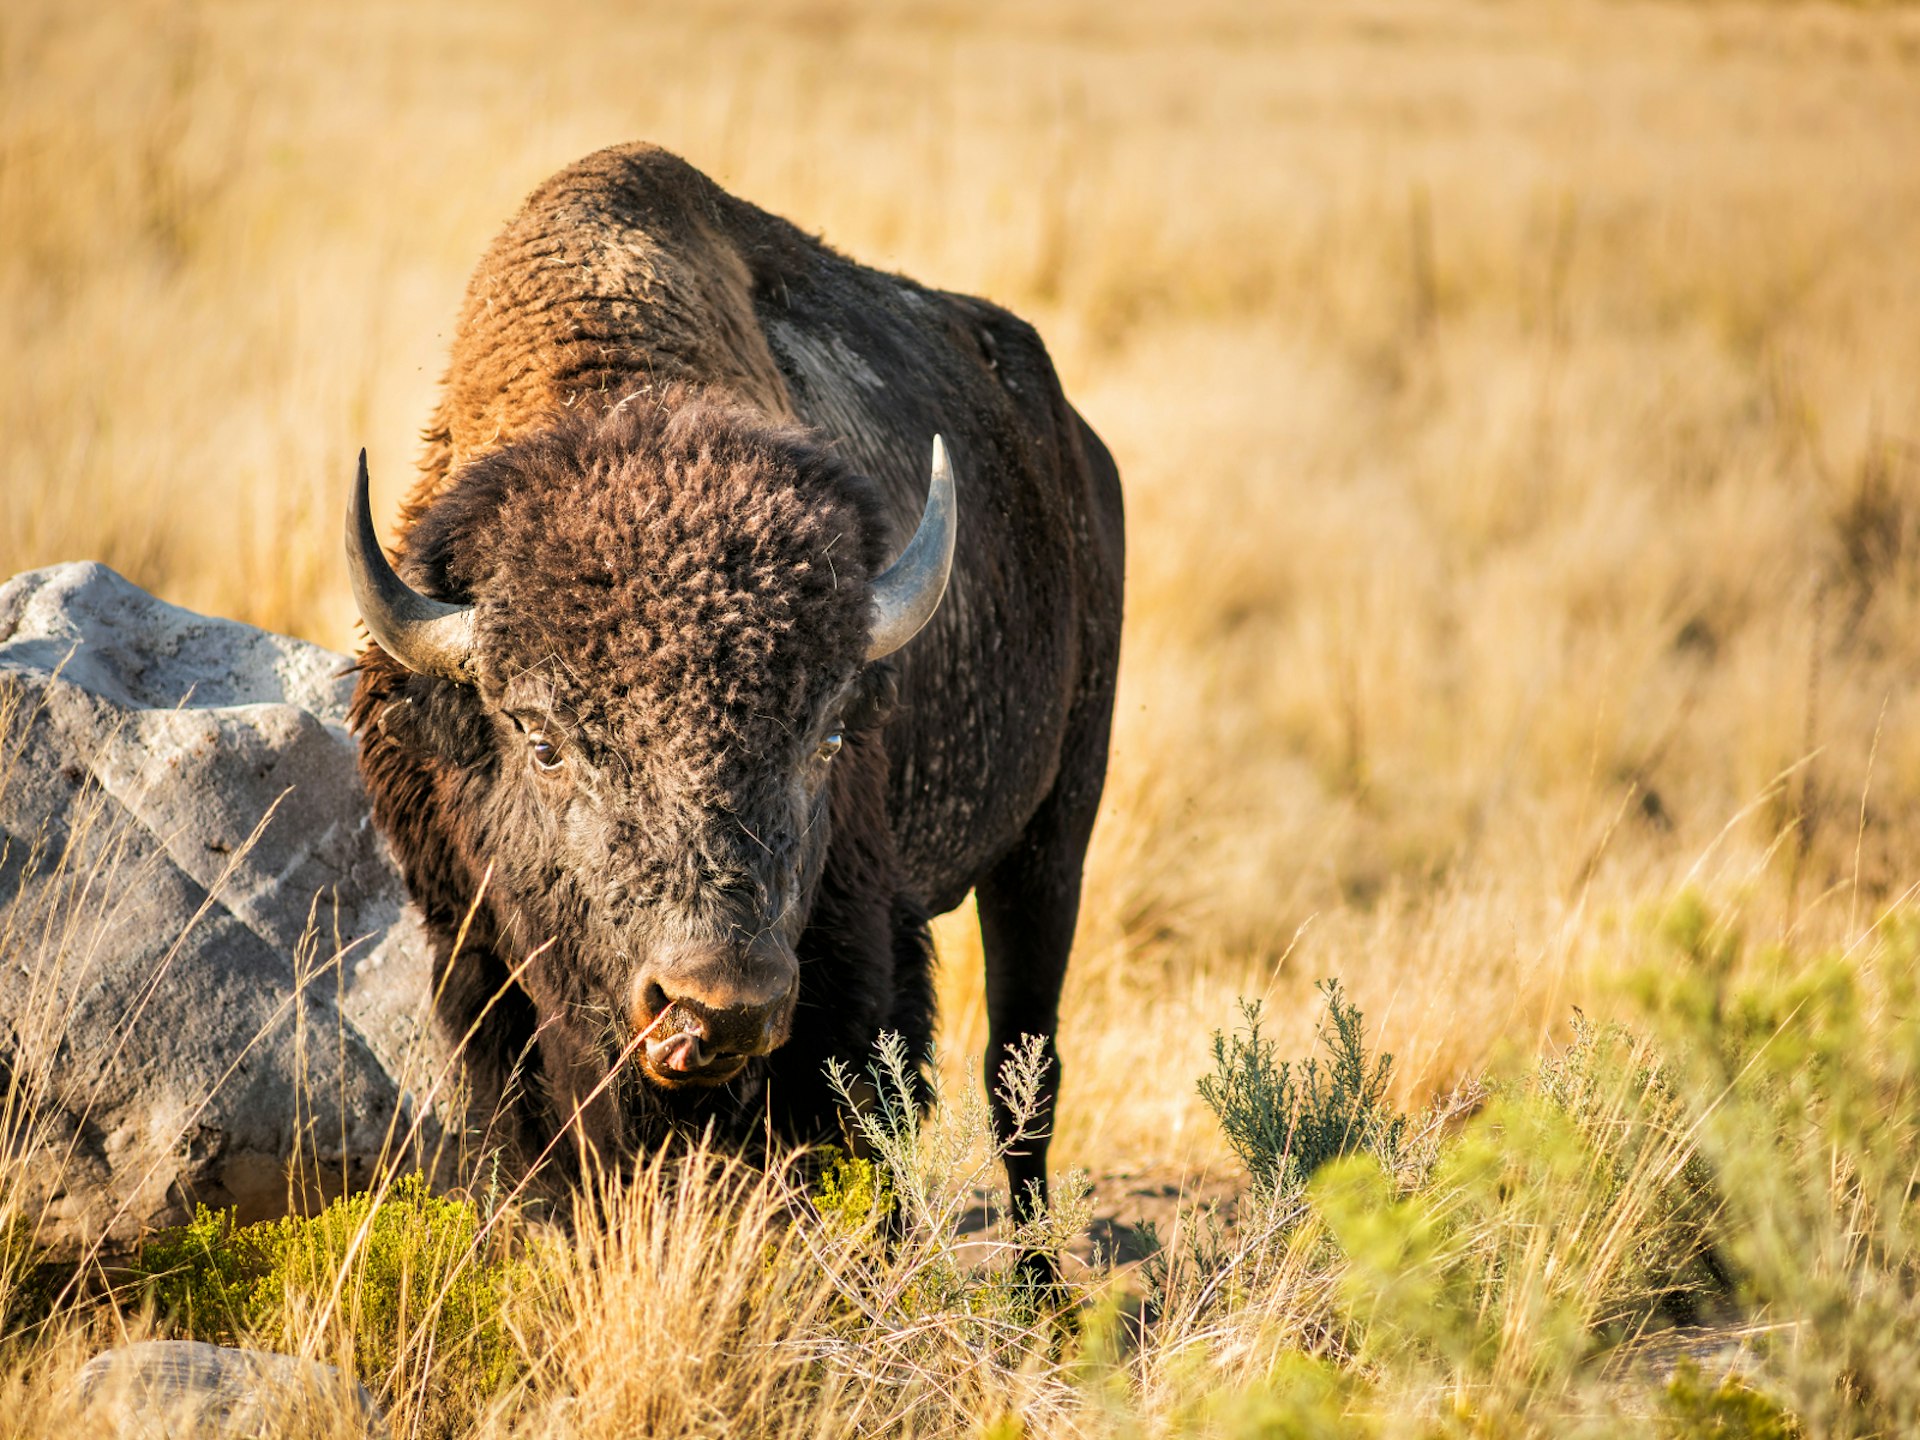 A bison on Antelope Island